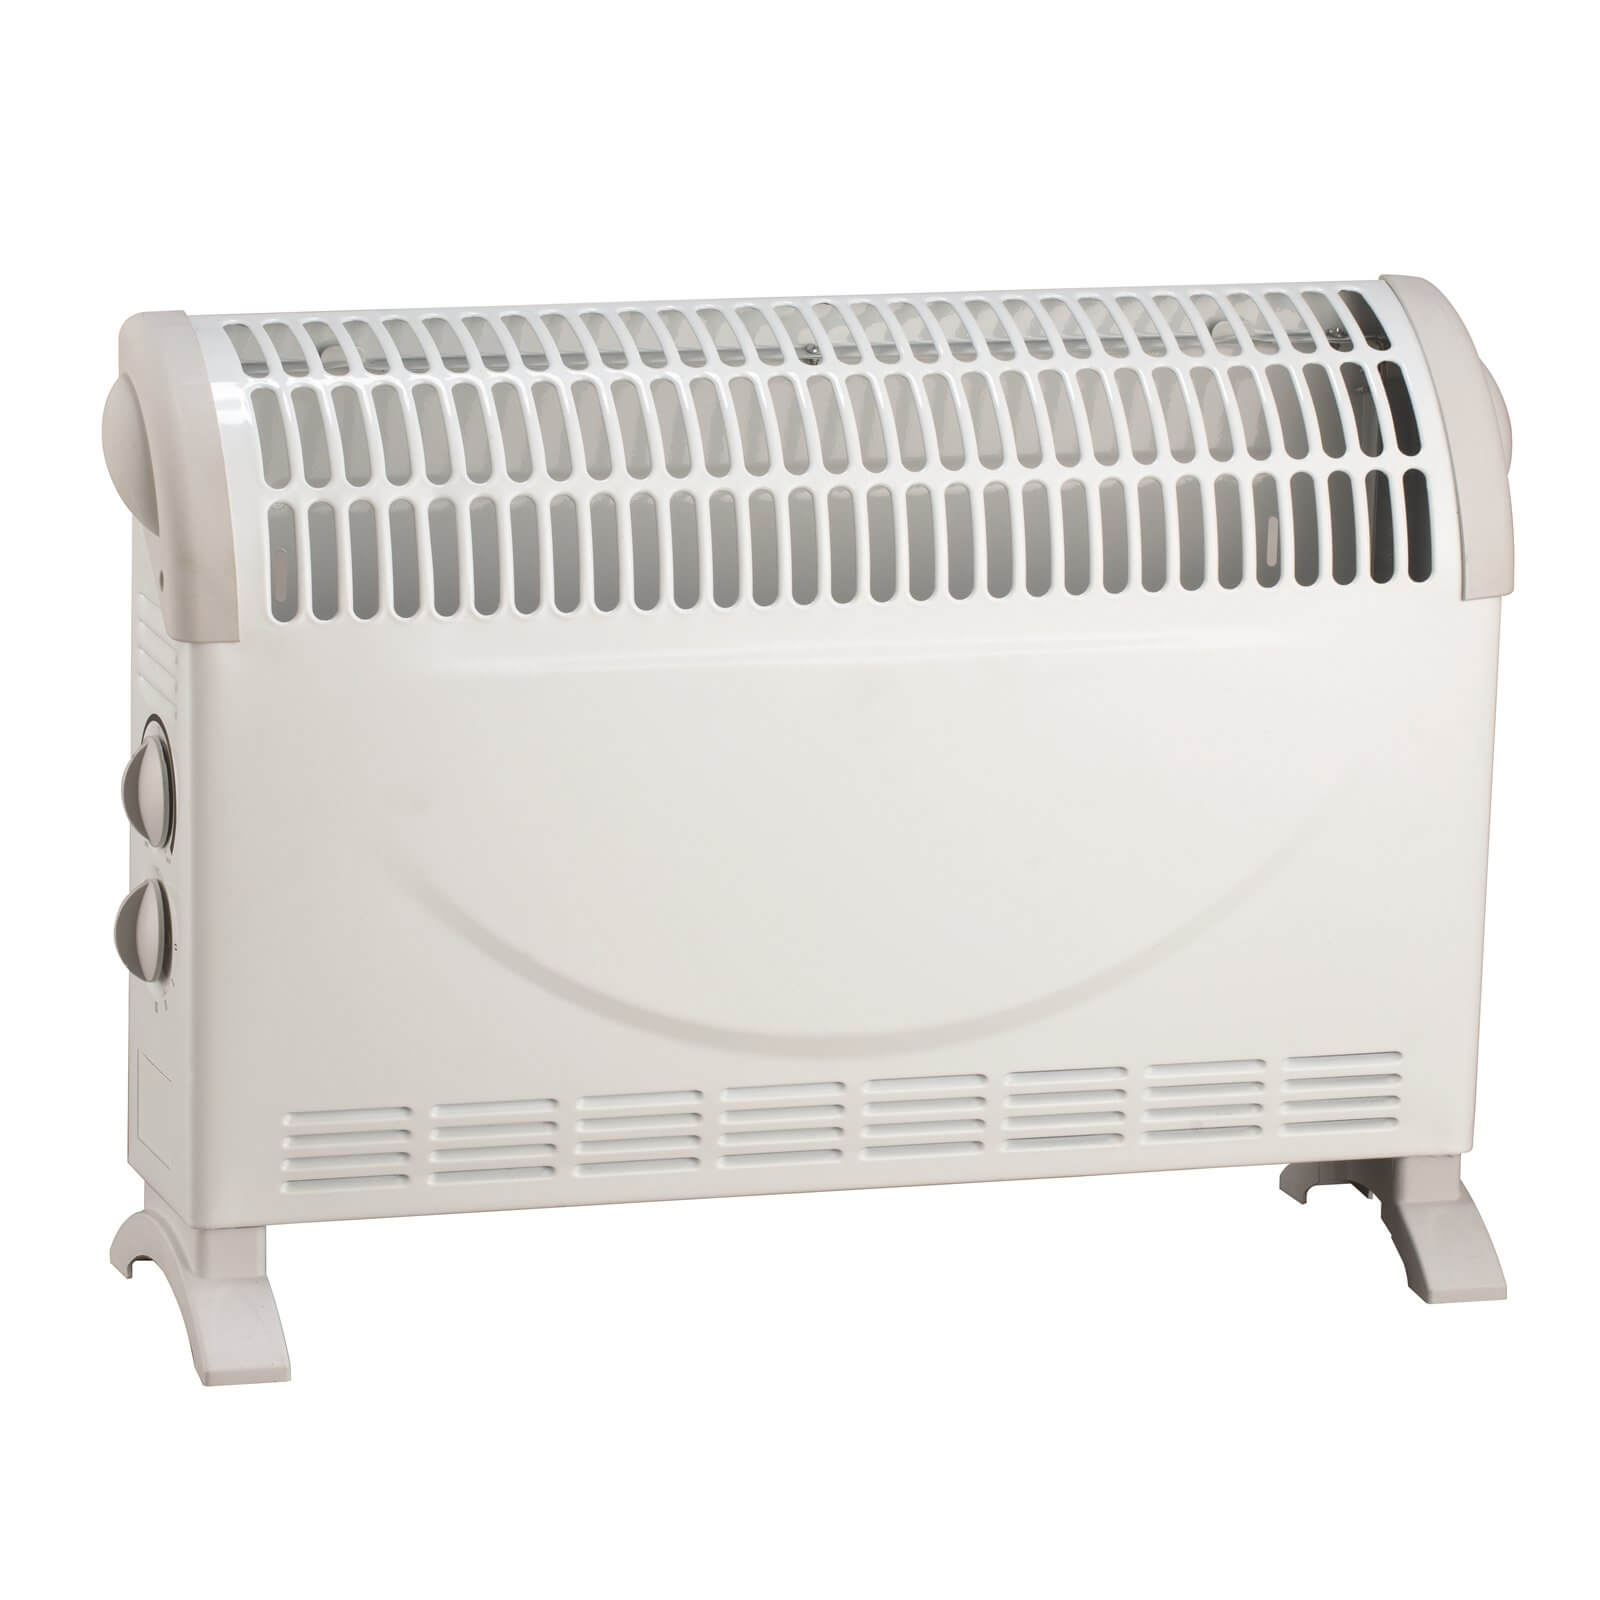 Stylec Electric Convector Heater in White - 2000W